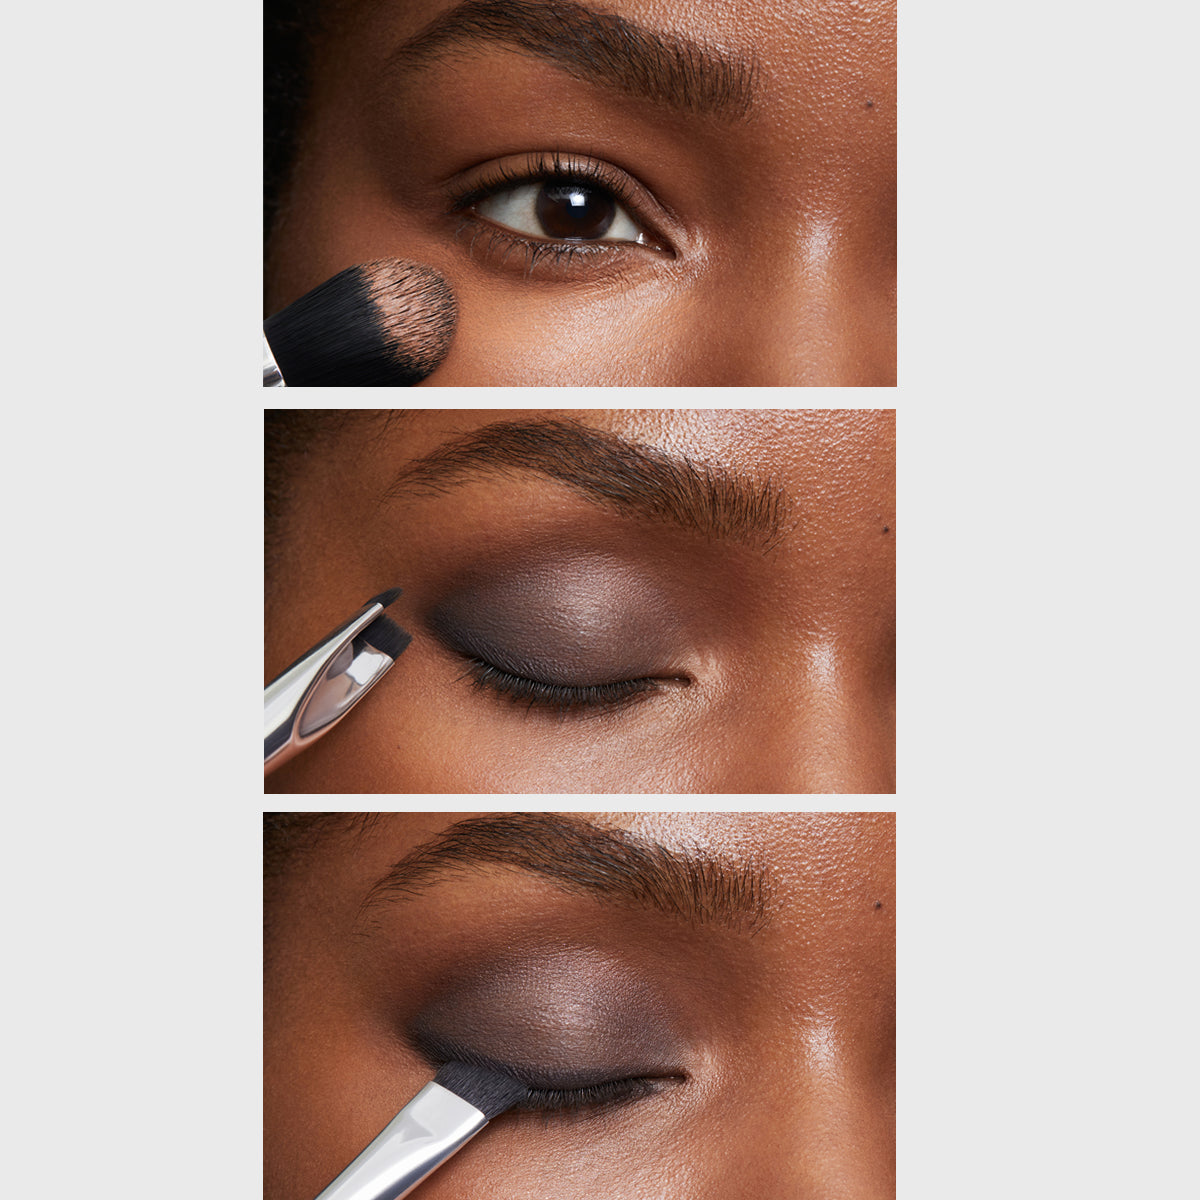 Steps to achieving the smokey eye using the palette and brush